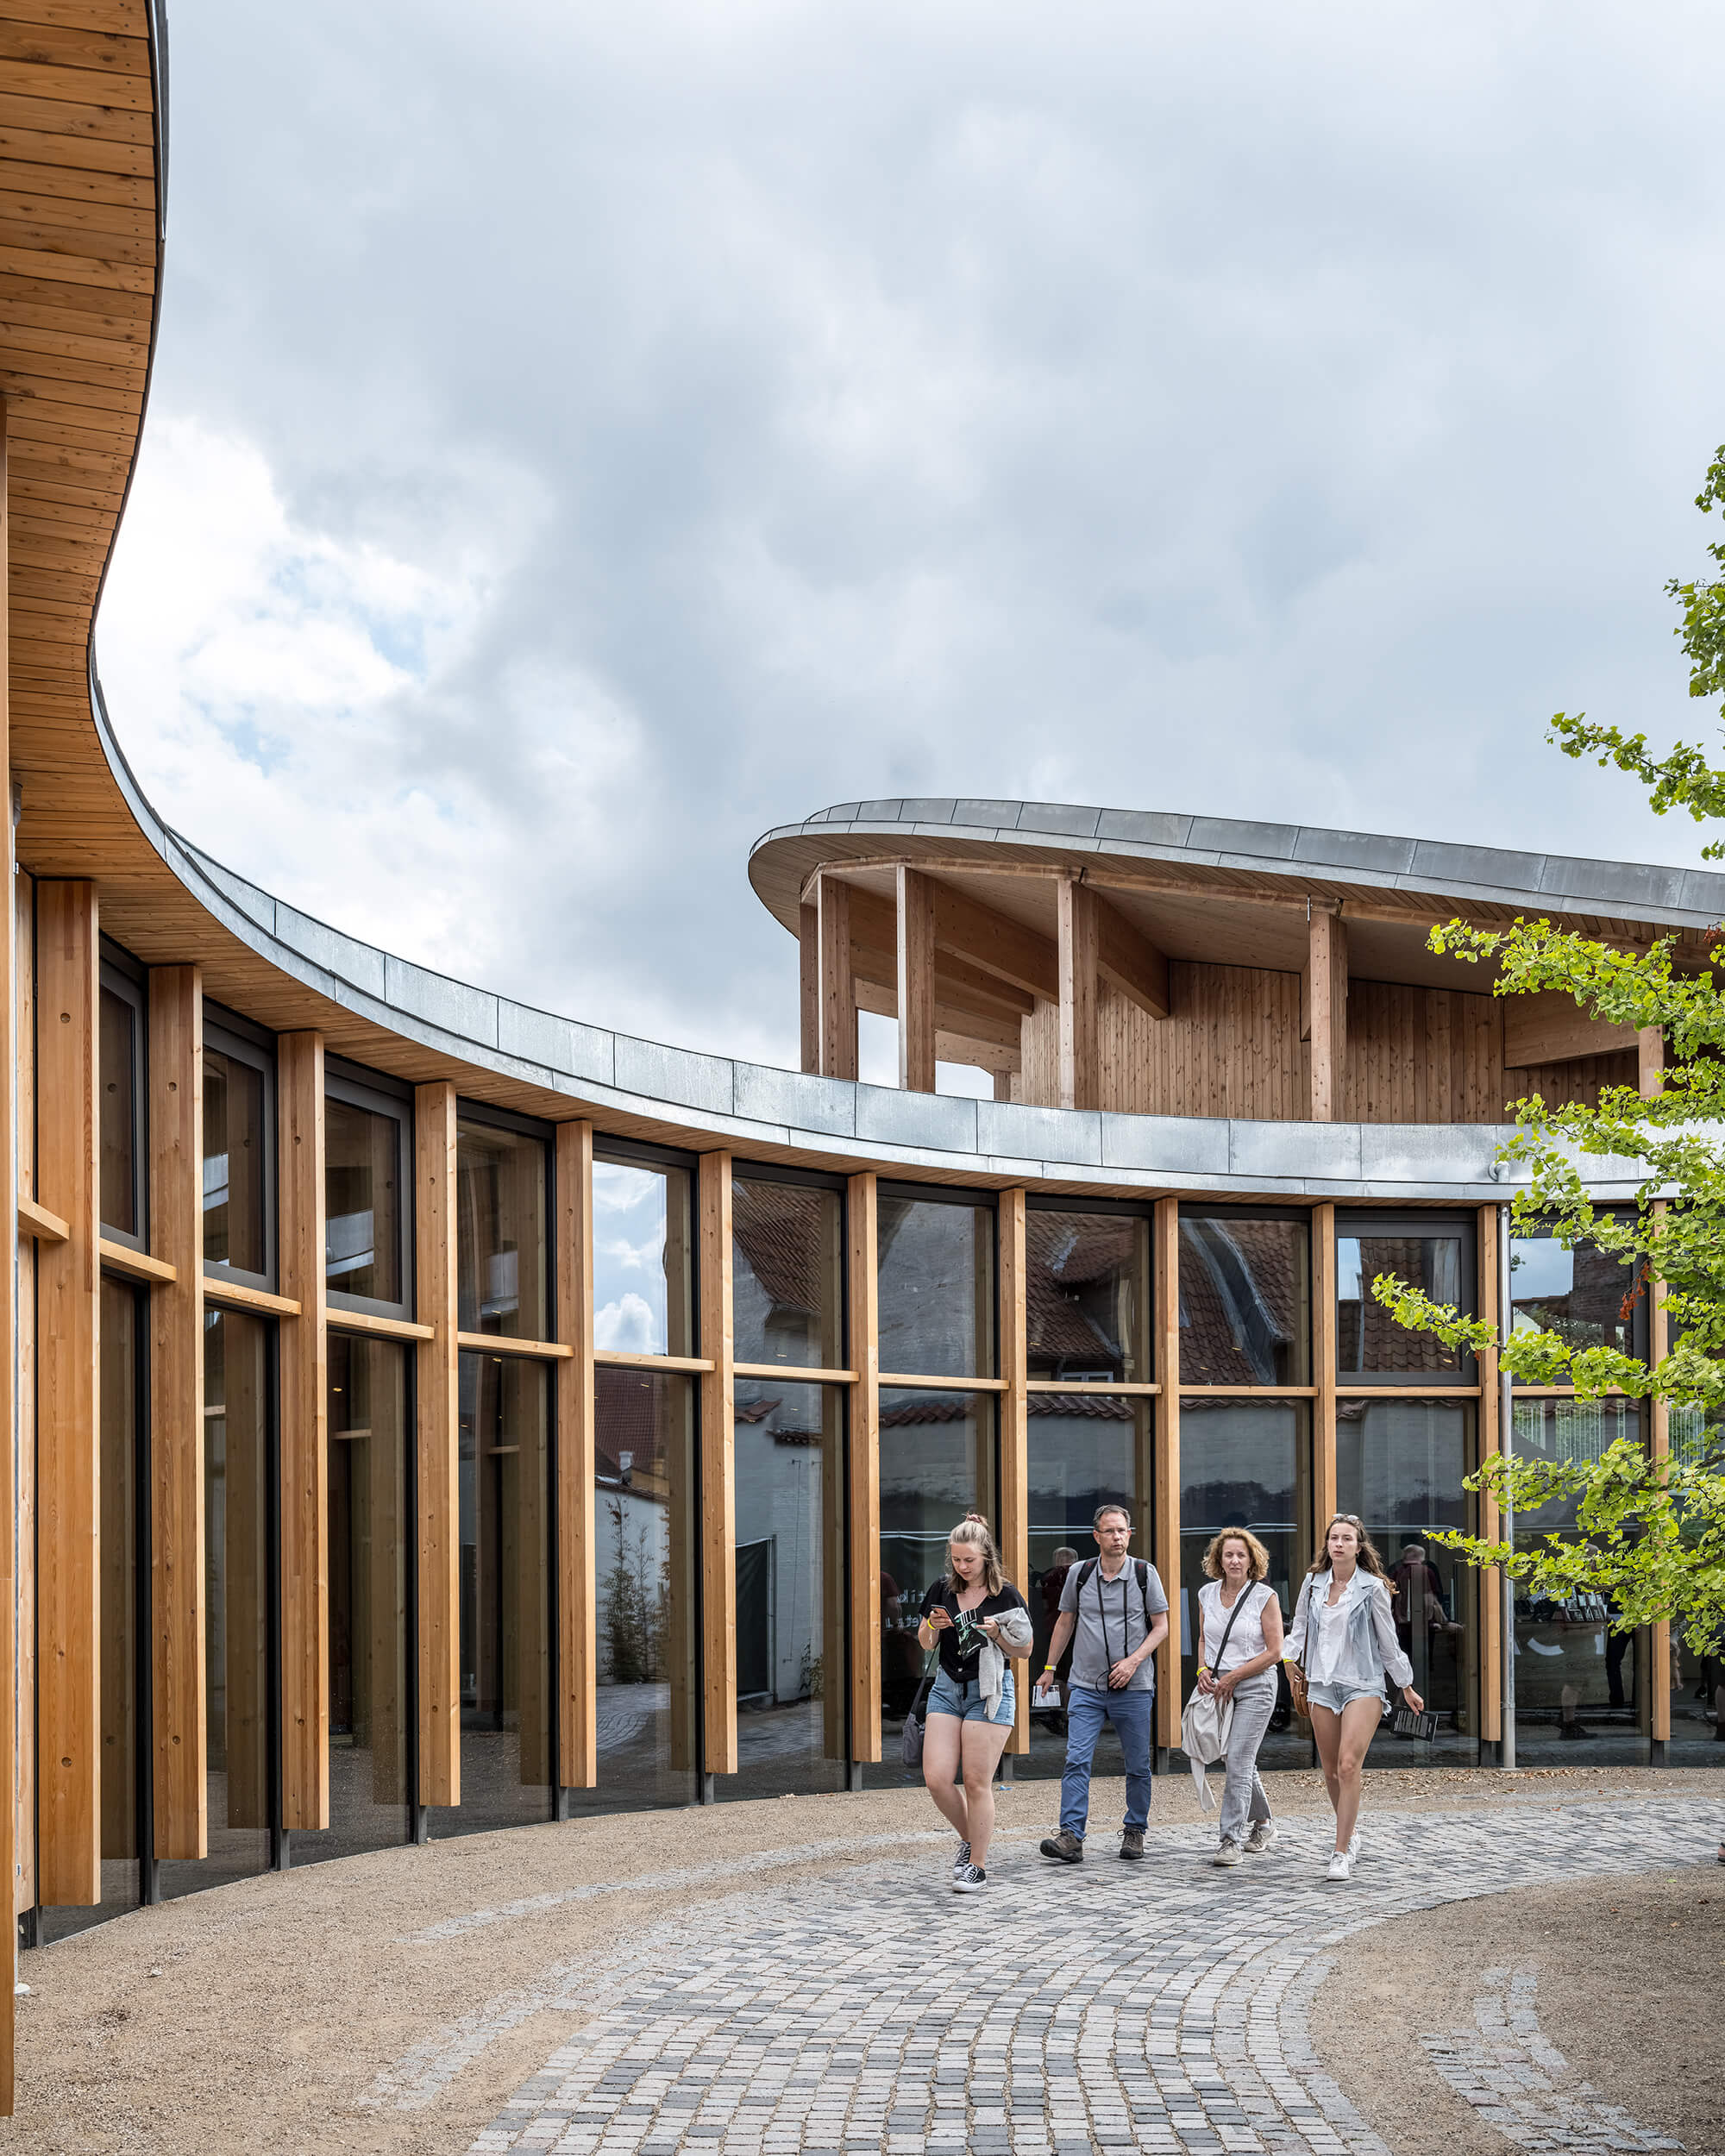 people walk around a curving timber and glass museum building dedicated to Hans Christian Andersen